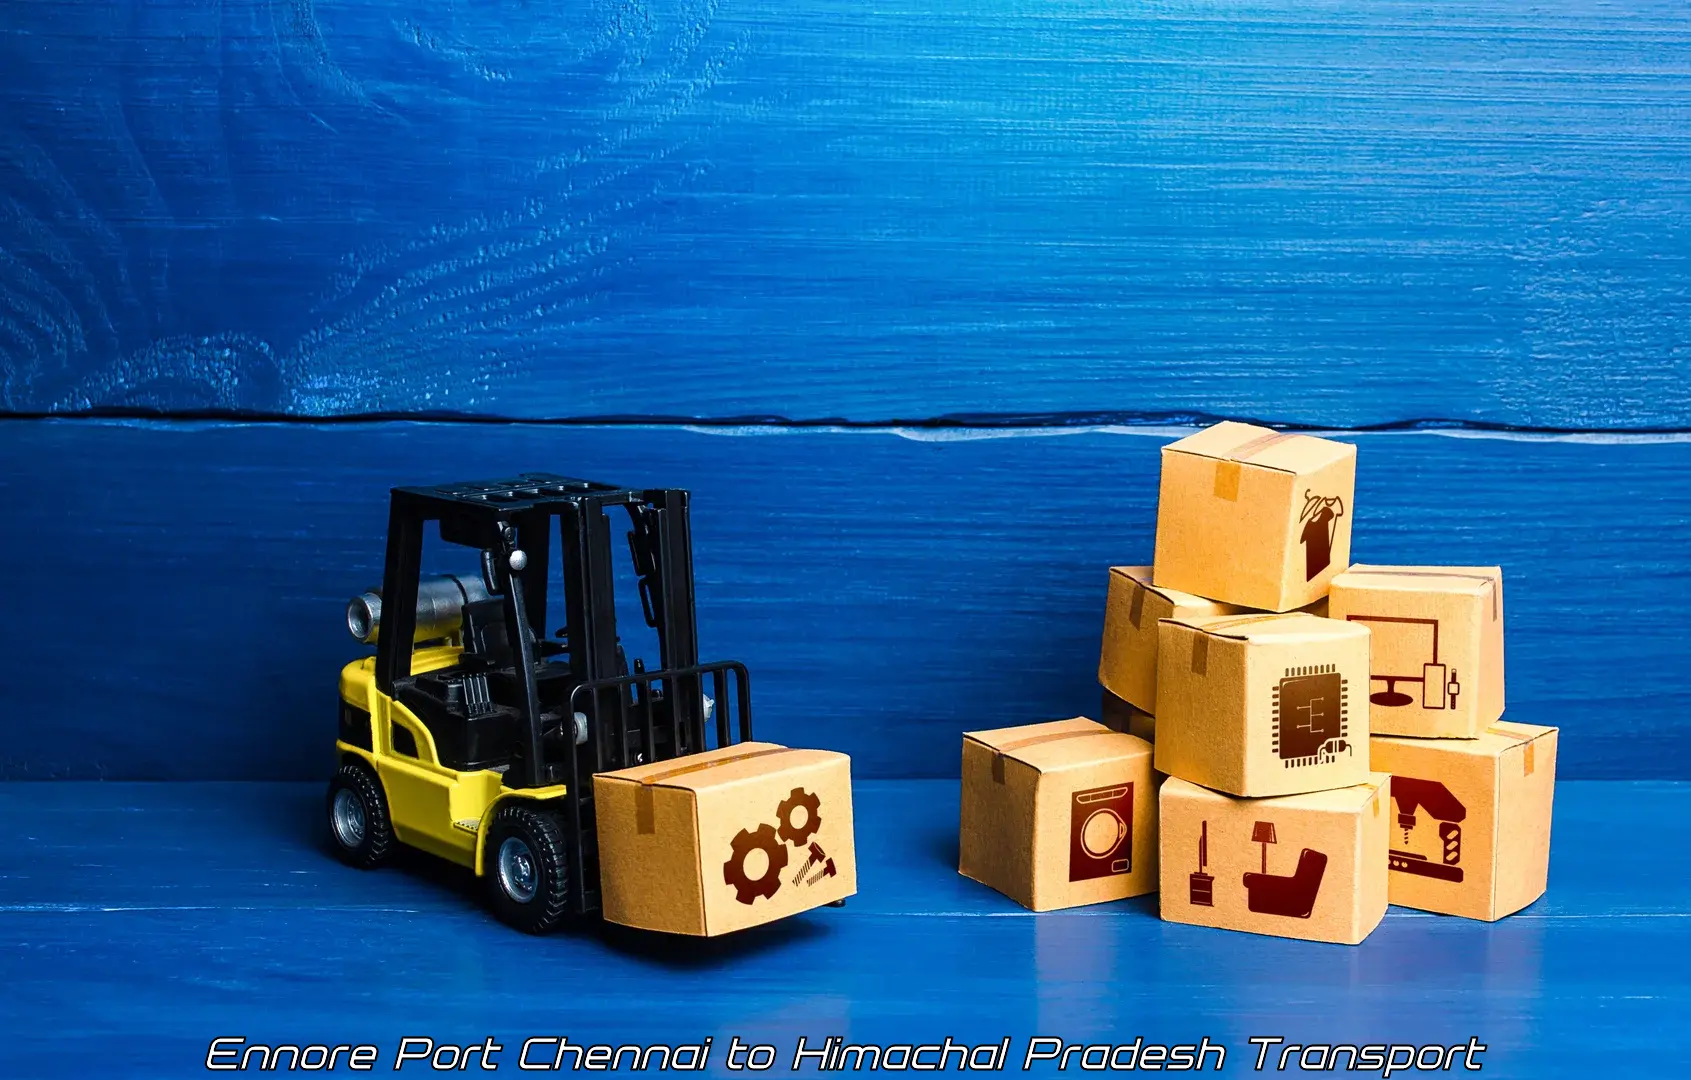 Part load transport service in India Ennore Port Chennai to Palion